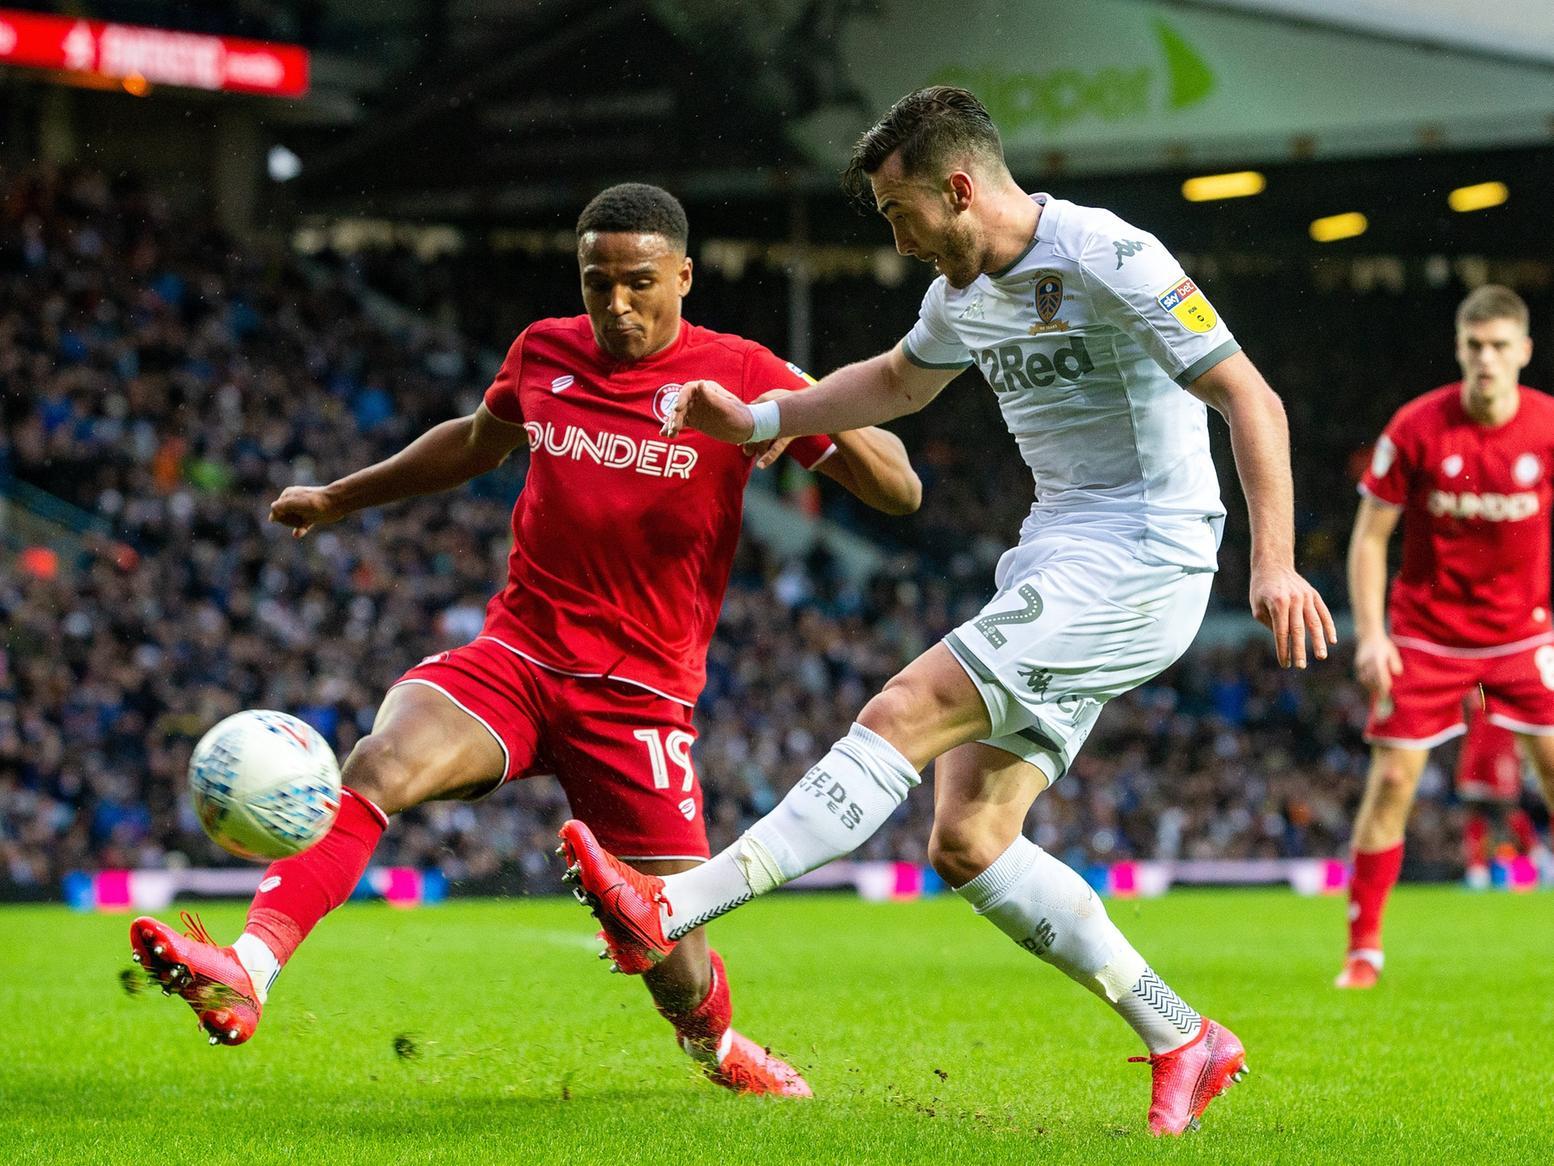 2019/20: 73  |  2018/19: 40 - Harrison made 10 chances alone in his last three games. He's a huge creative force for Leeds at present/